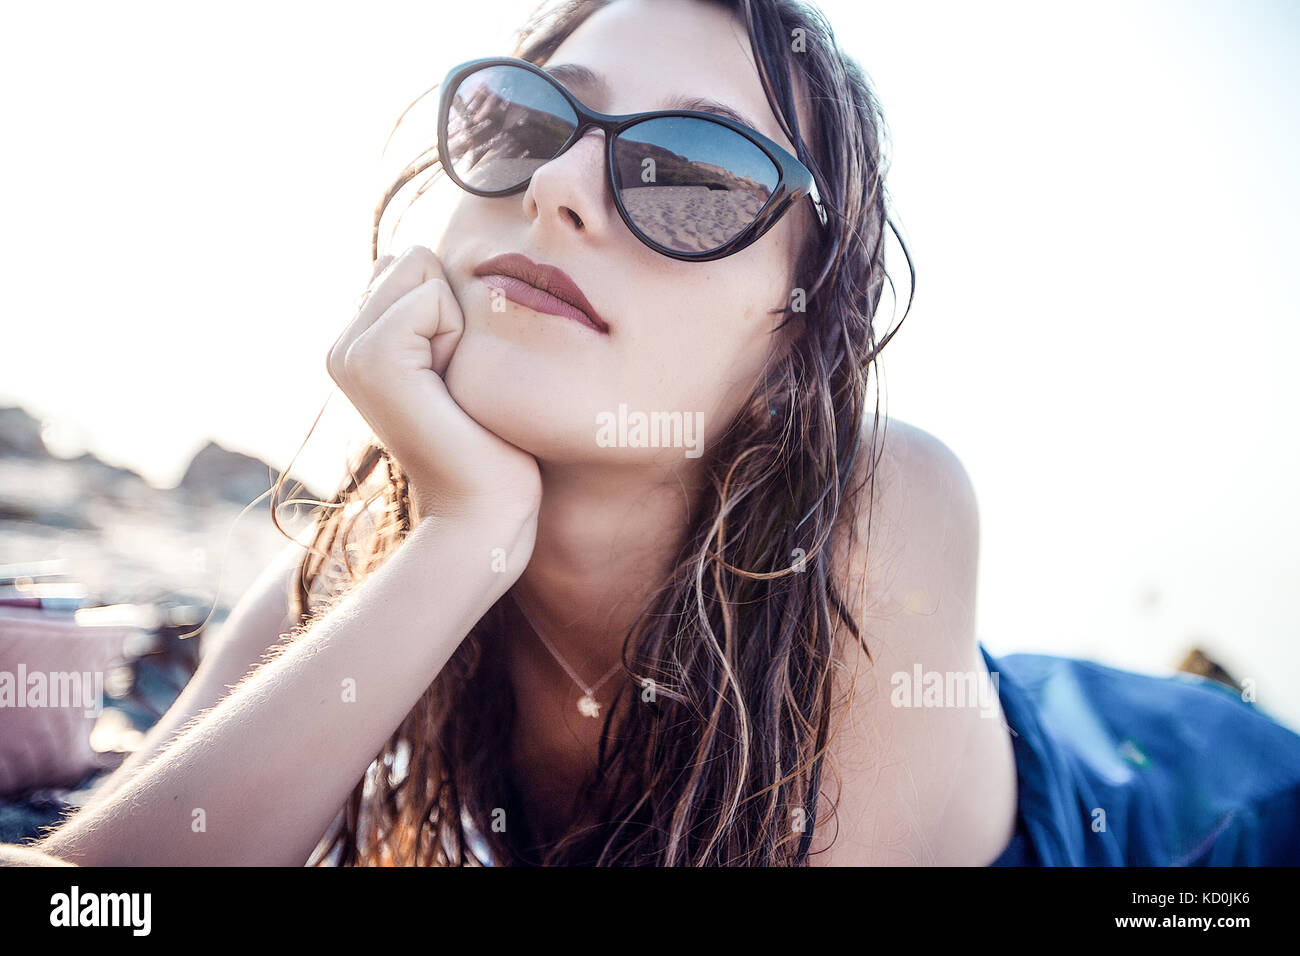 Portrait of young woman in shades on beach, Odessa, Ukraine Stock Photo